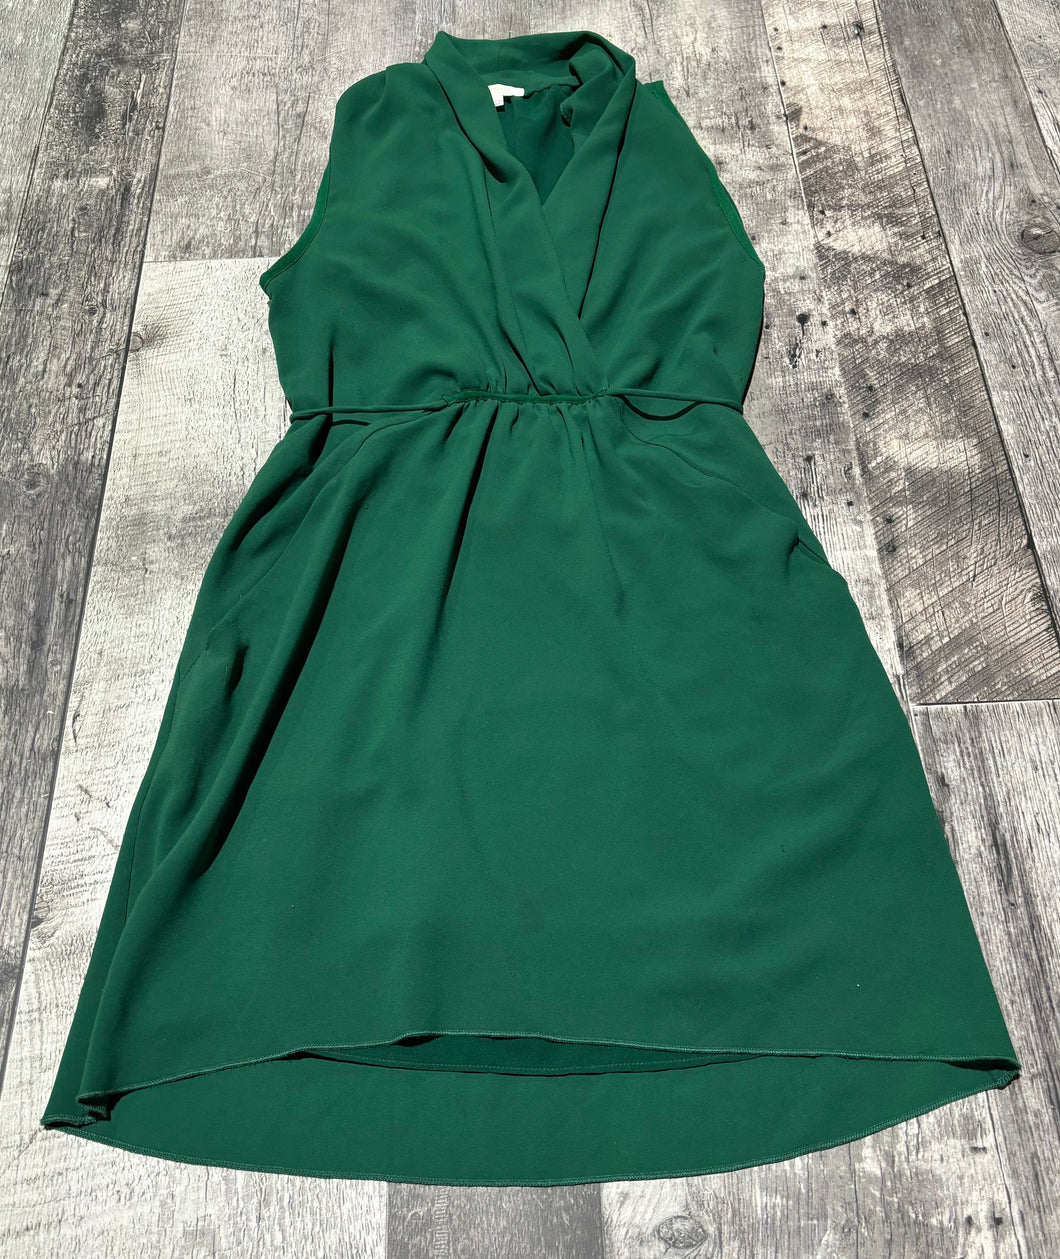 Wilfred green dress - Hers size XS